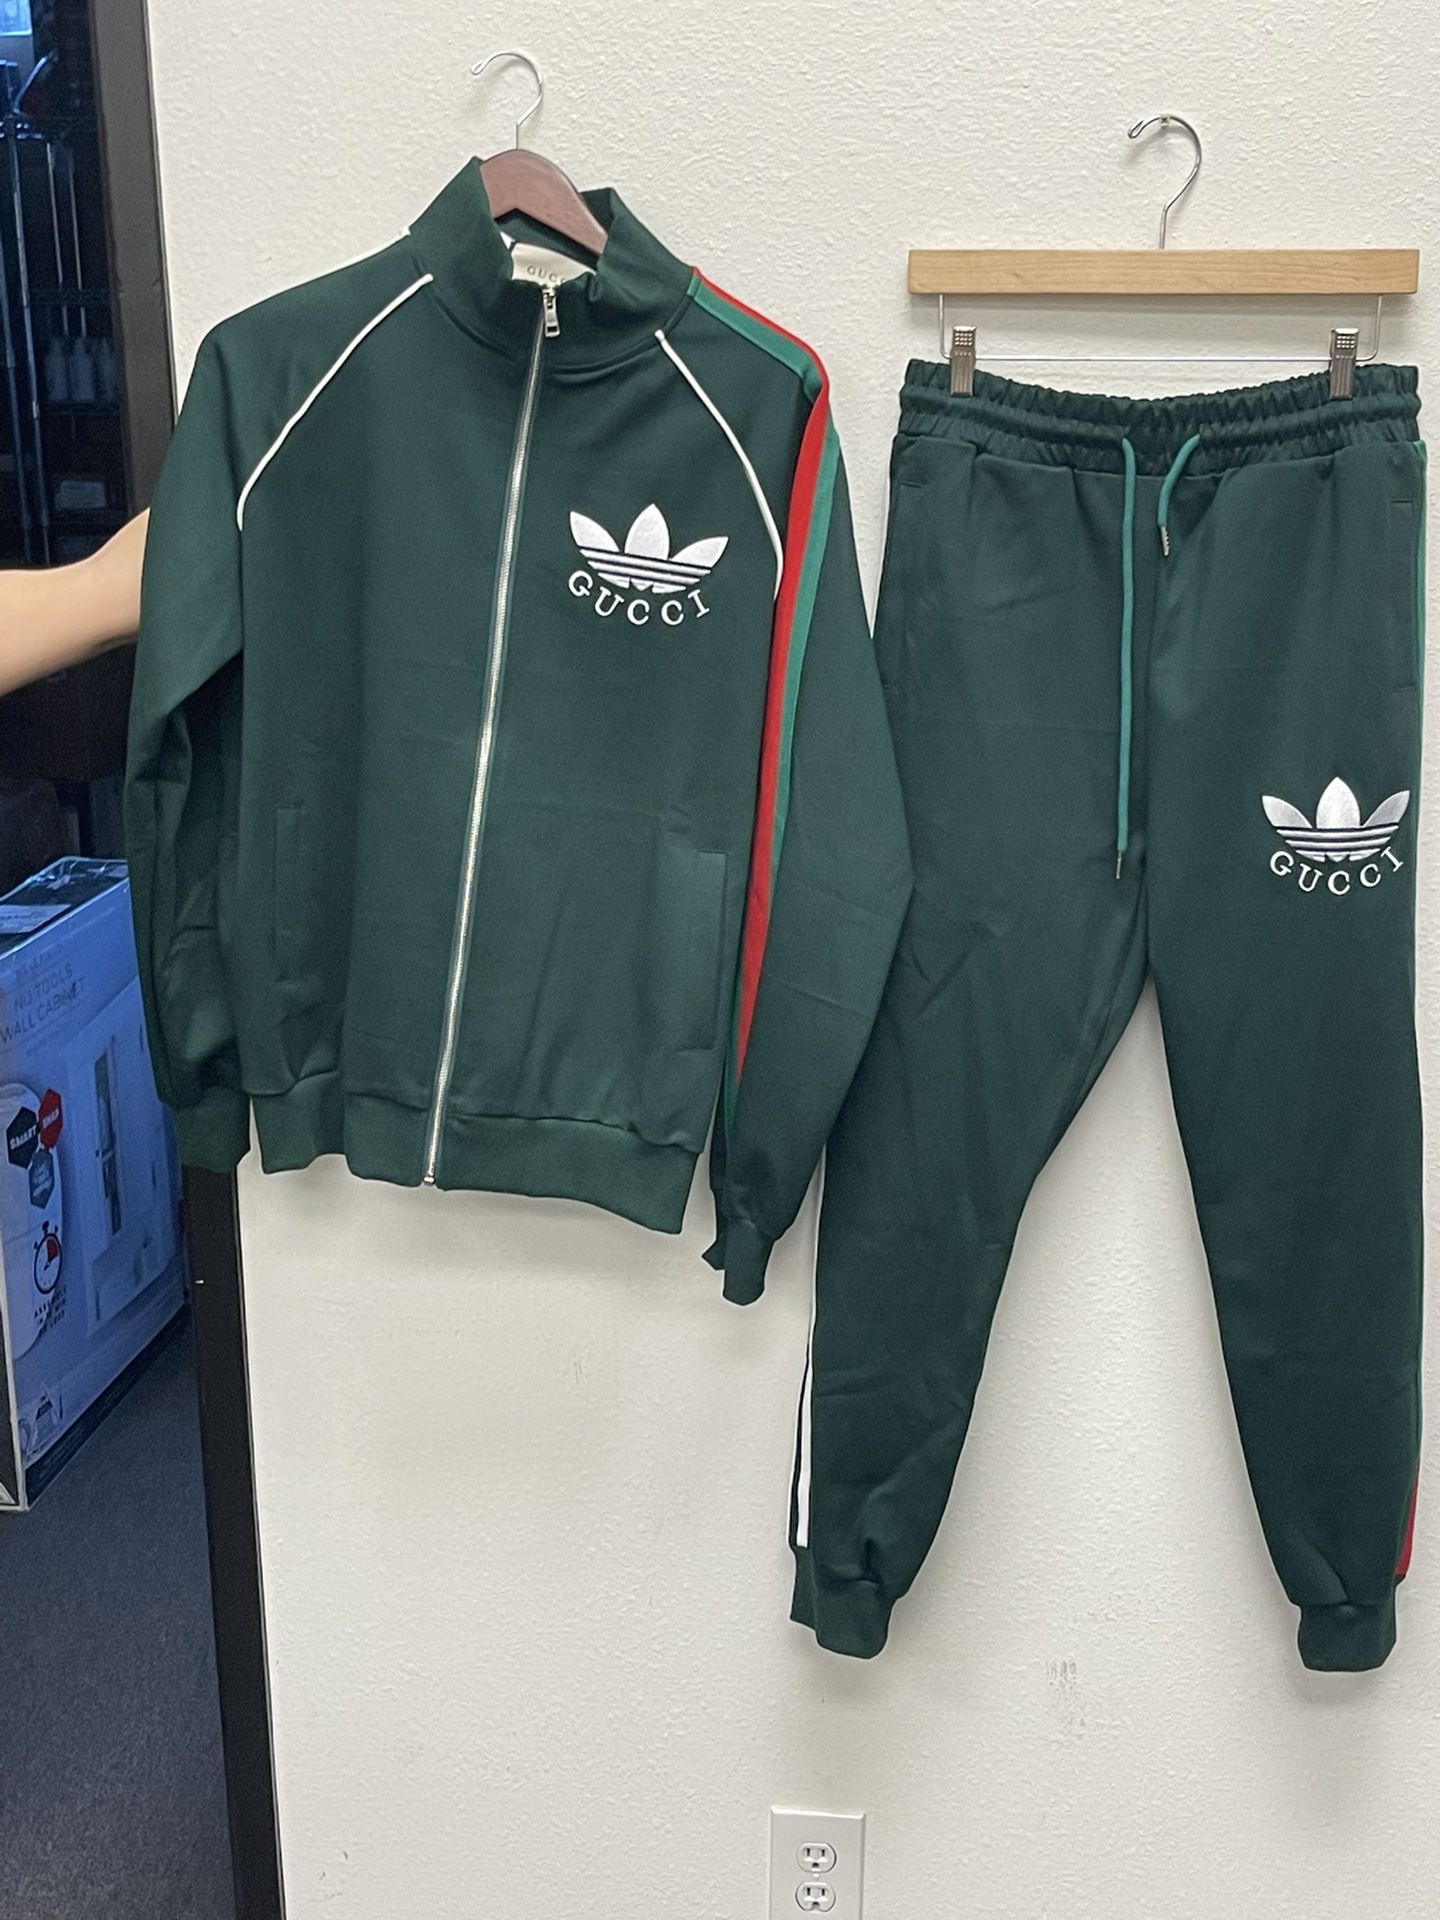 New Adidas And Gucci Collaboration Track suit for Sale in Huntington Beach, CA -